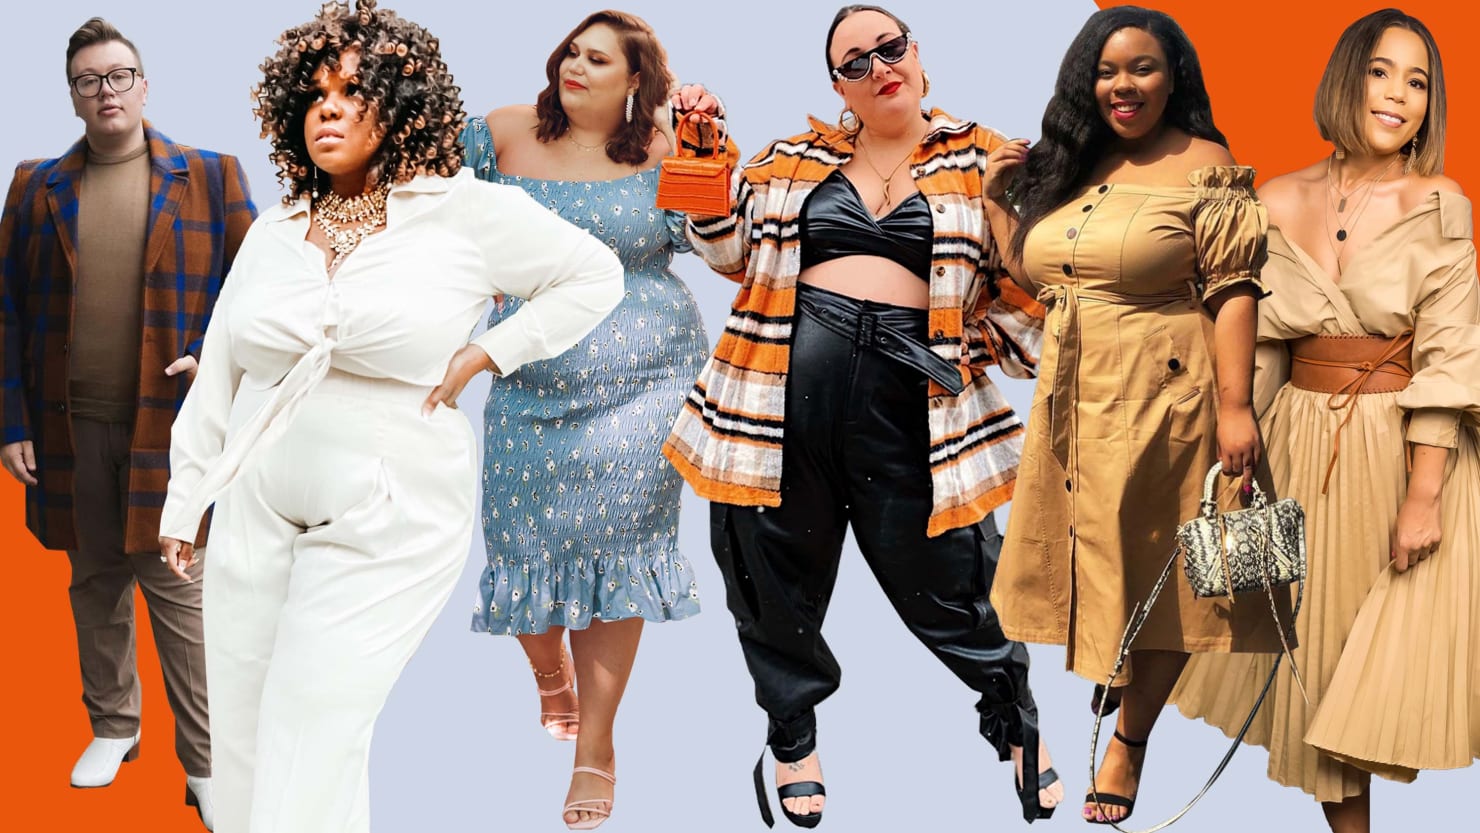 Lane Bryant - Your lounge-at-home uniform deserves a luxe little